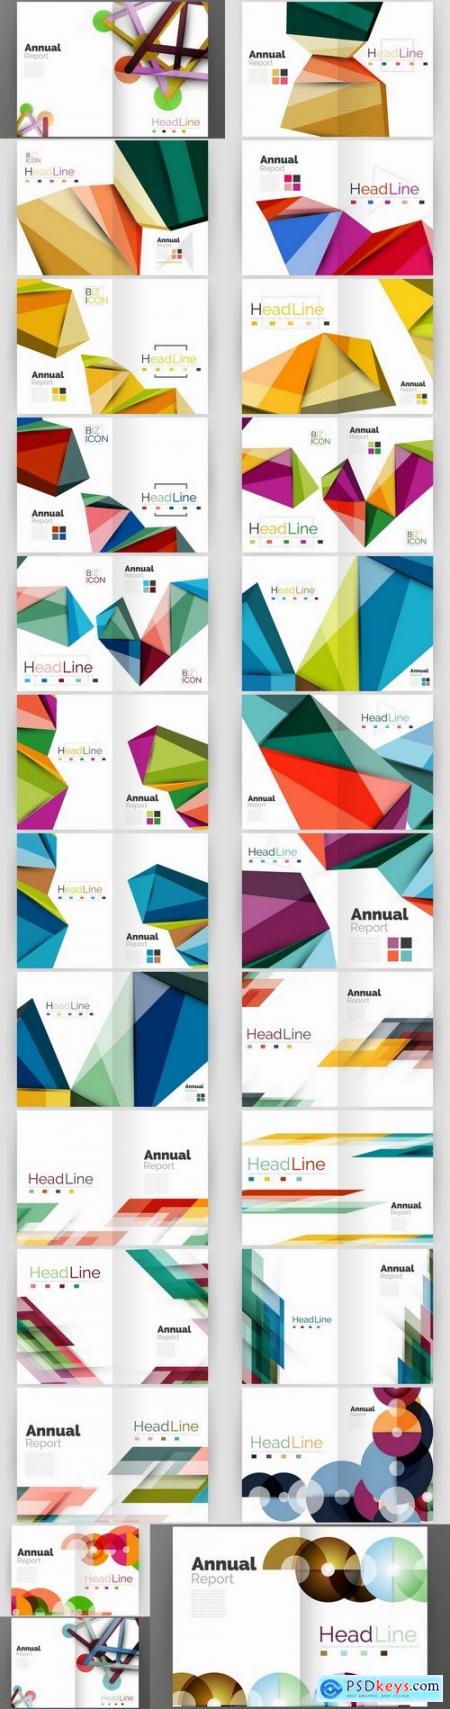 Book cover template log example flyer banner vector image 2-25 EPS